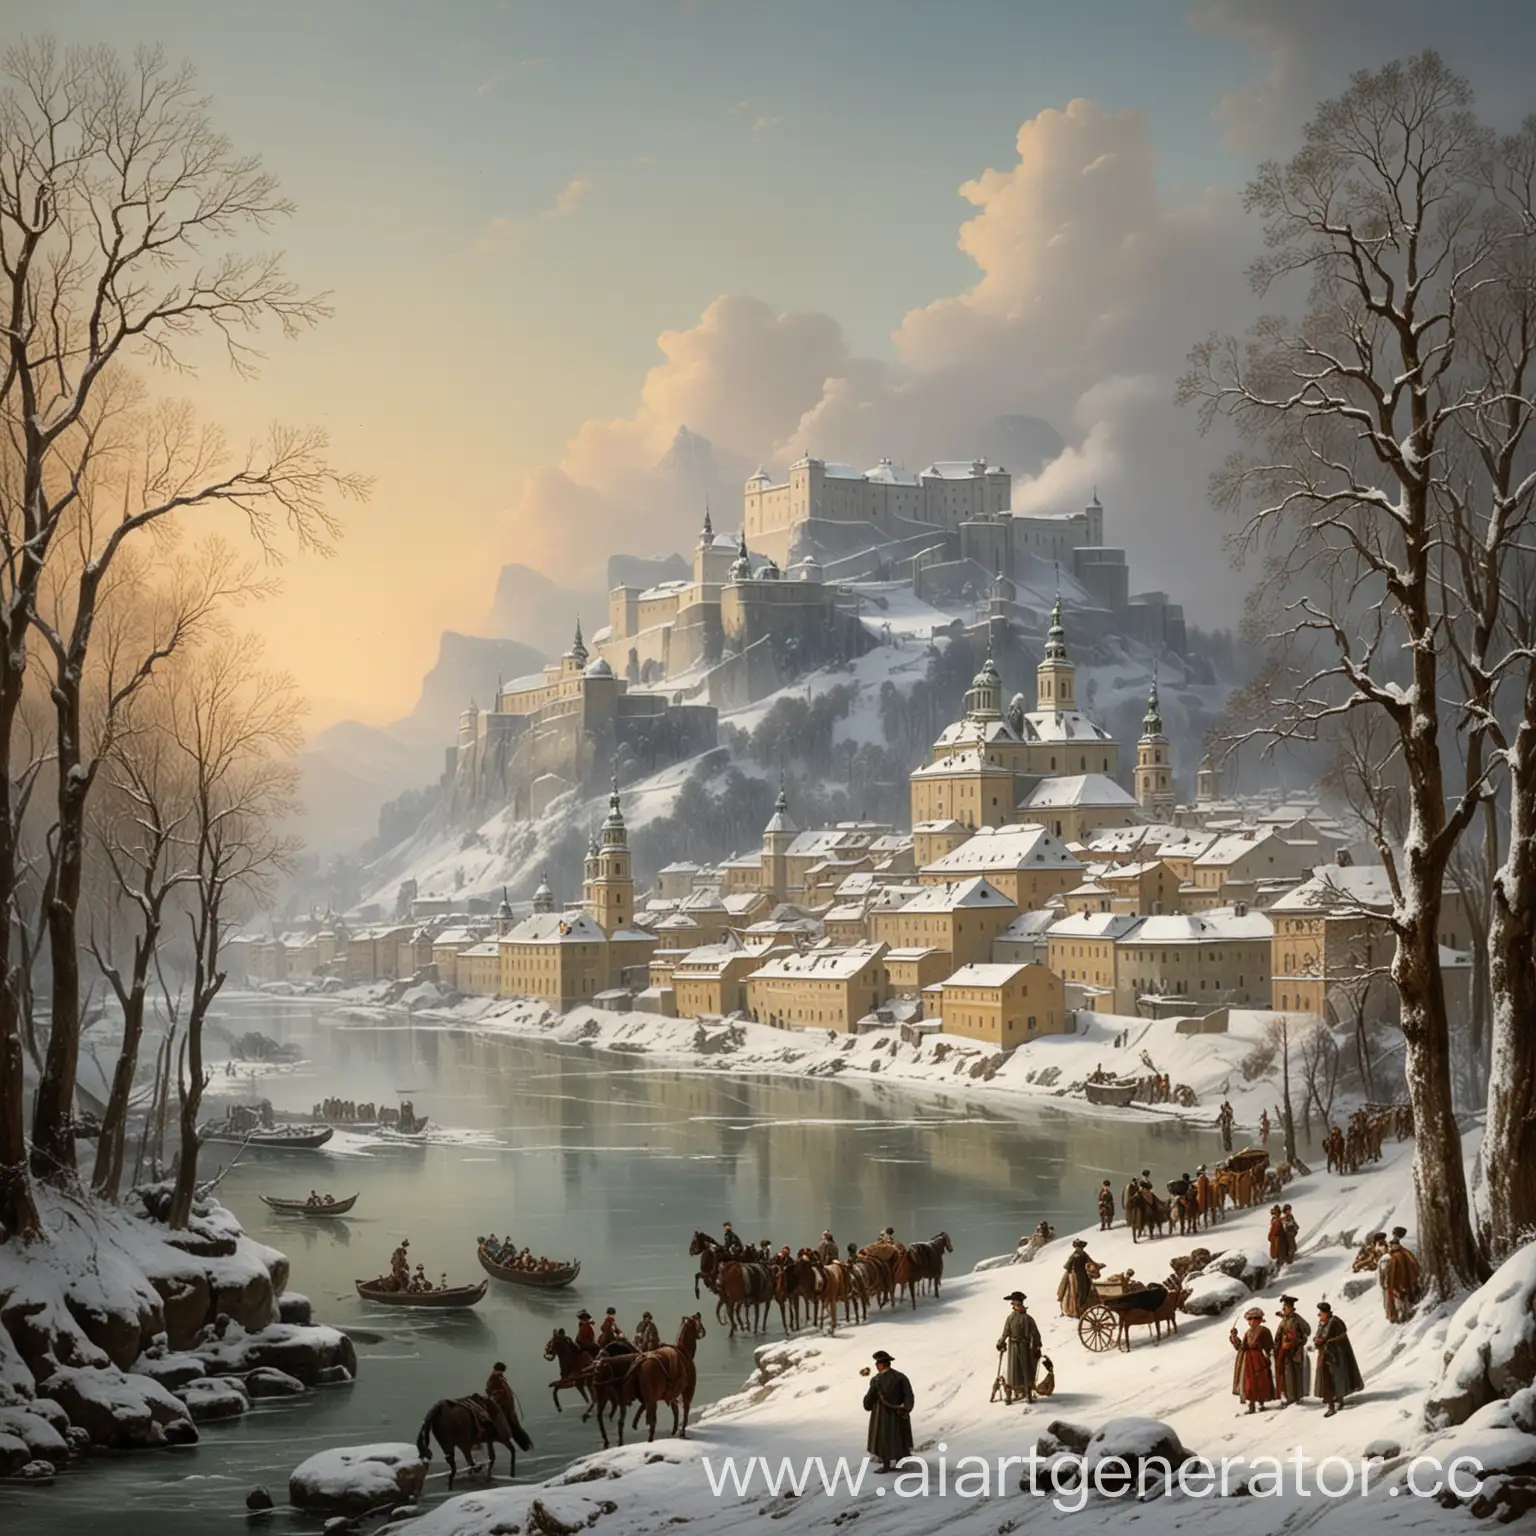 Winter-Scene-Salzburg-1780-with-SnowCovered-Town-and-Historic-Buildings